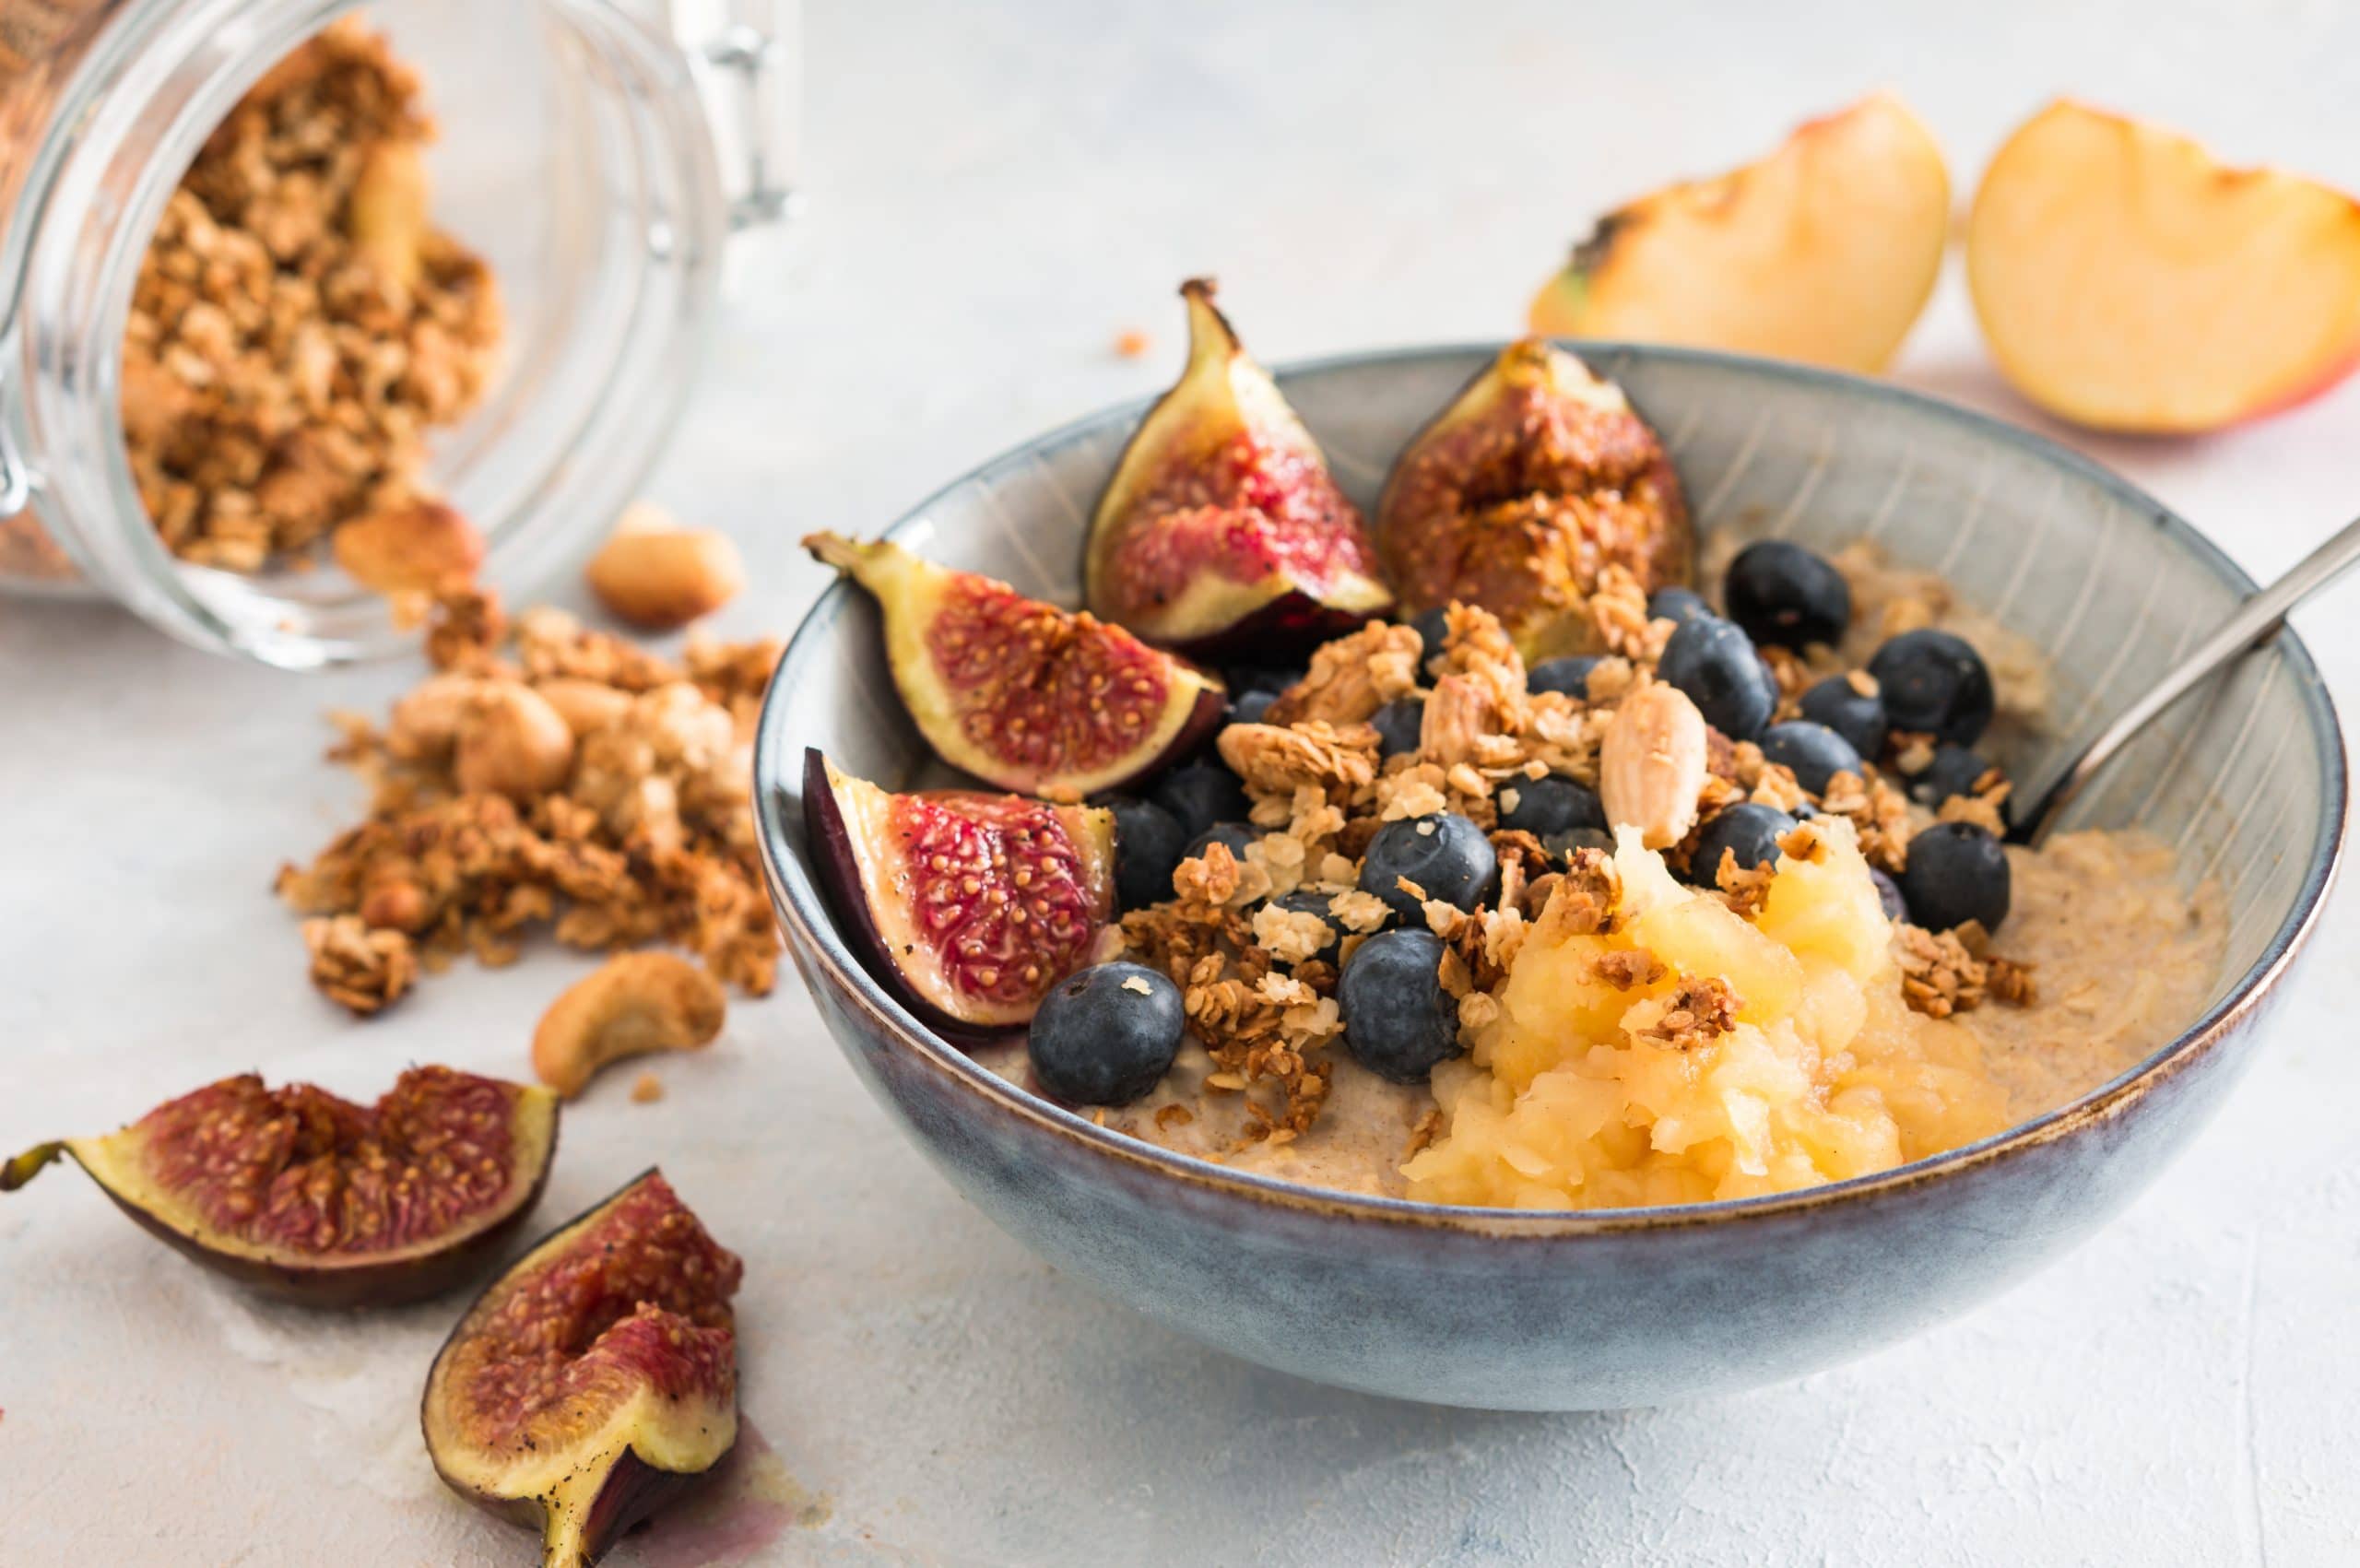 Oatmeal with Figs, Apples and Cinnamon